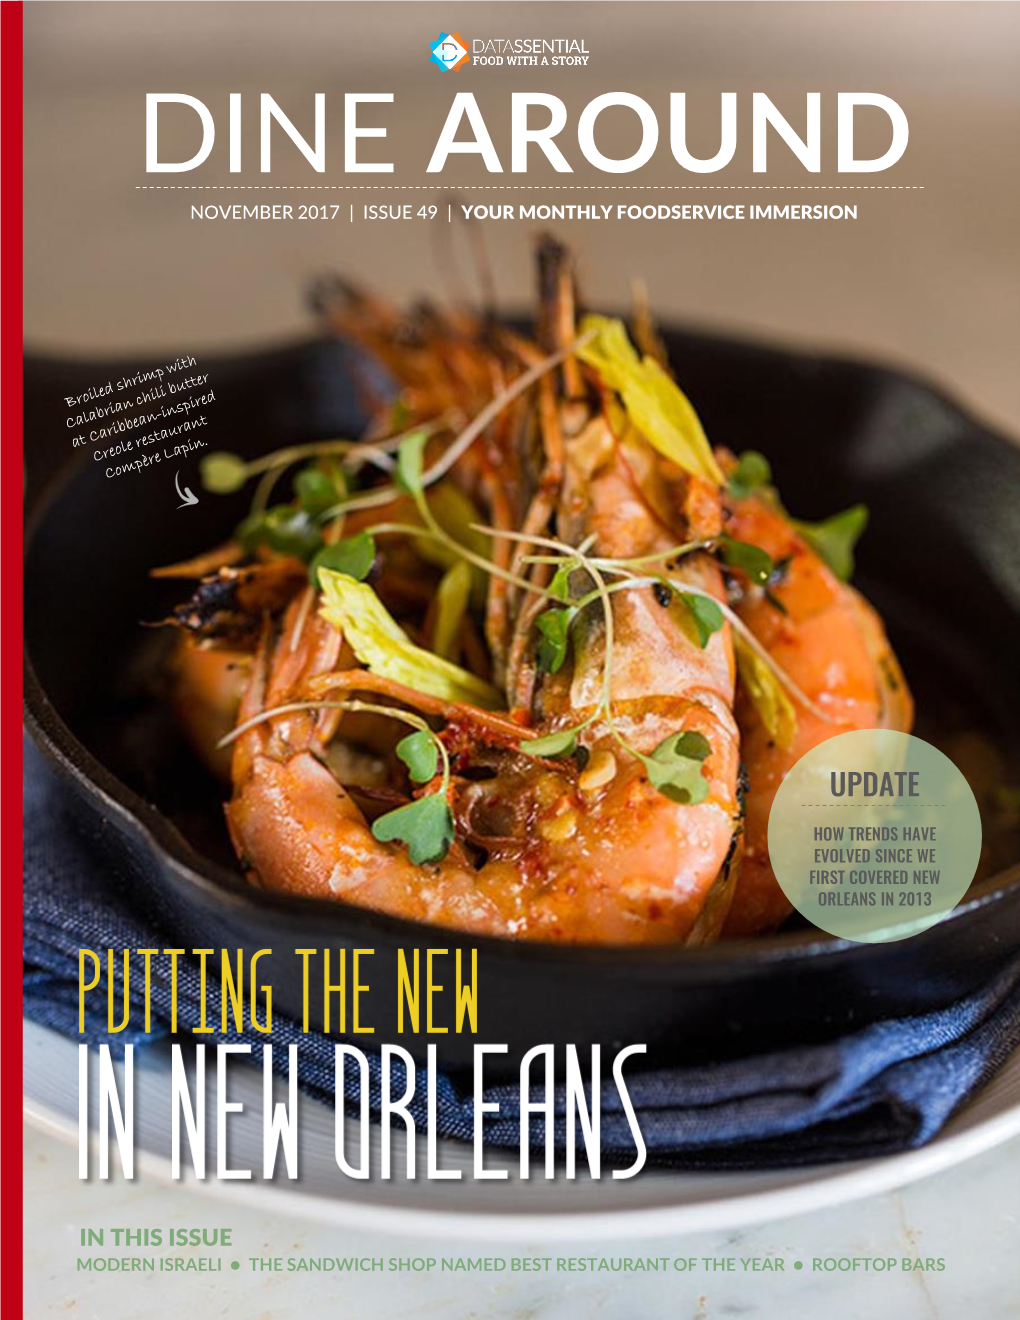 Dine Around November 2017 | Issue 49 | Your Monthly Foodservice Immersion